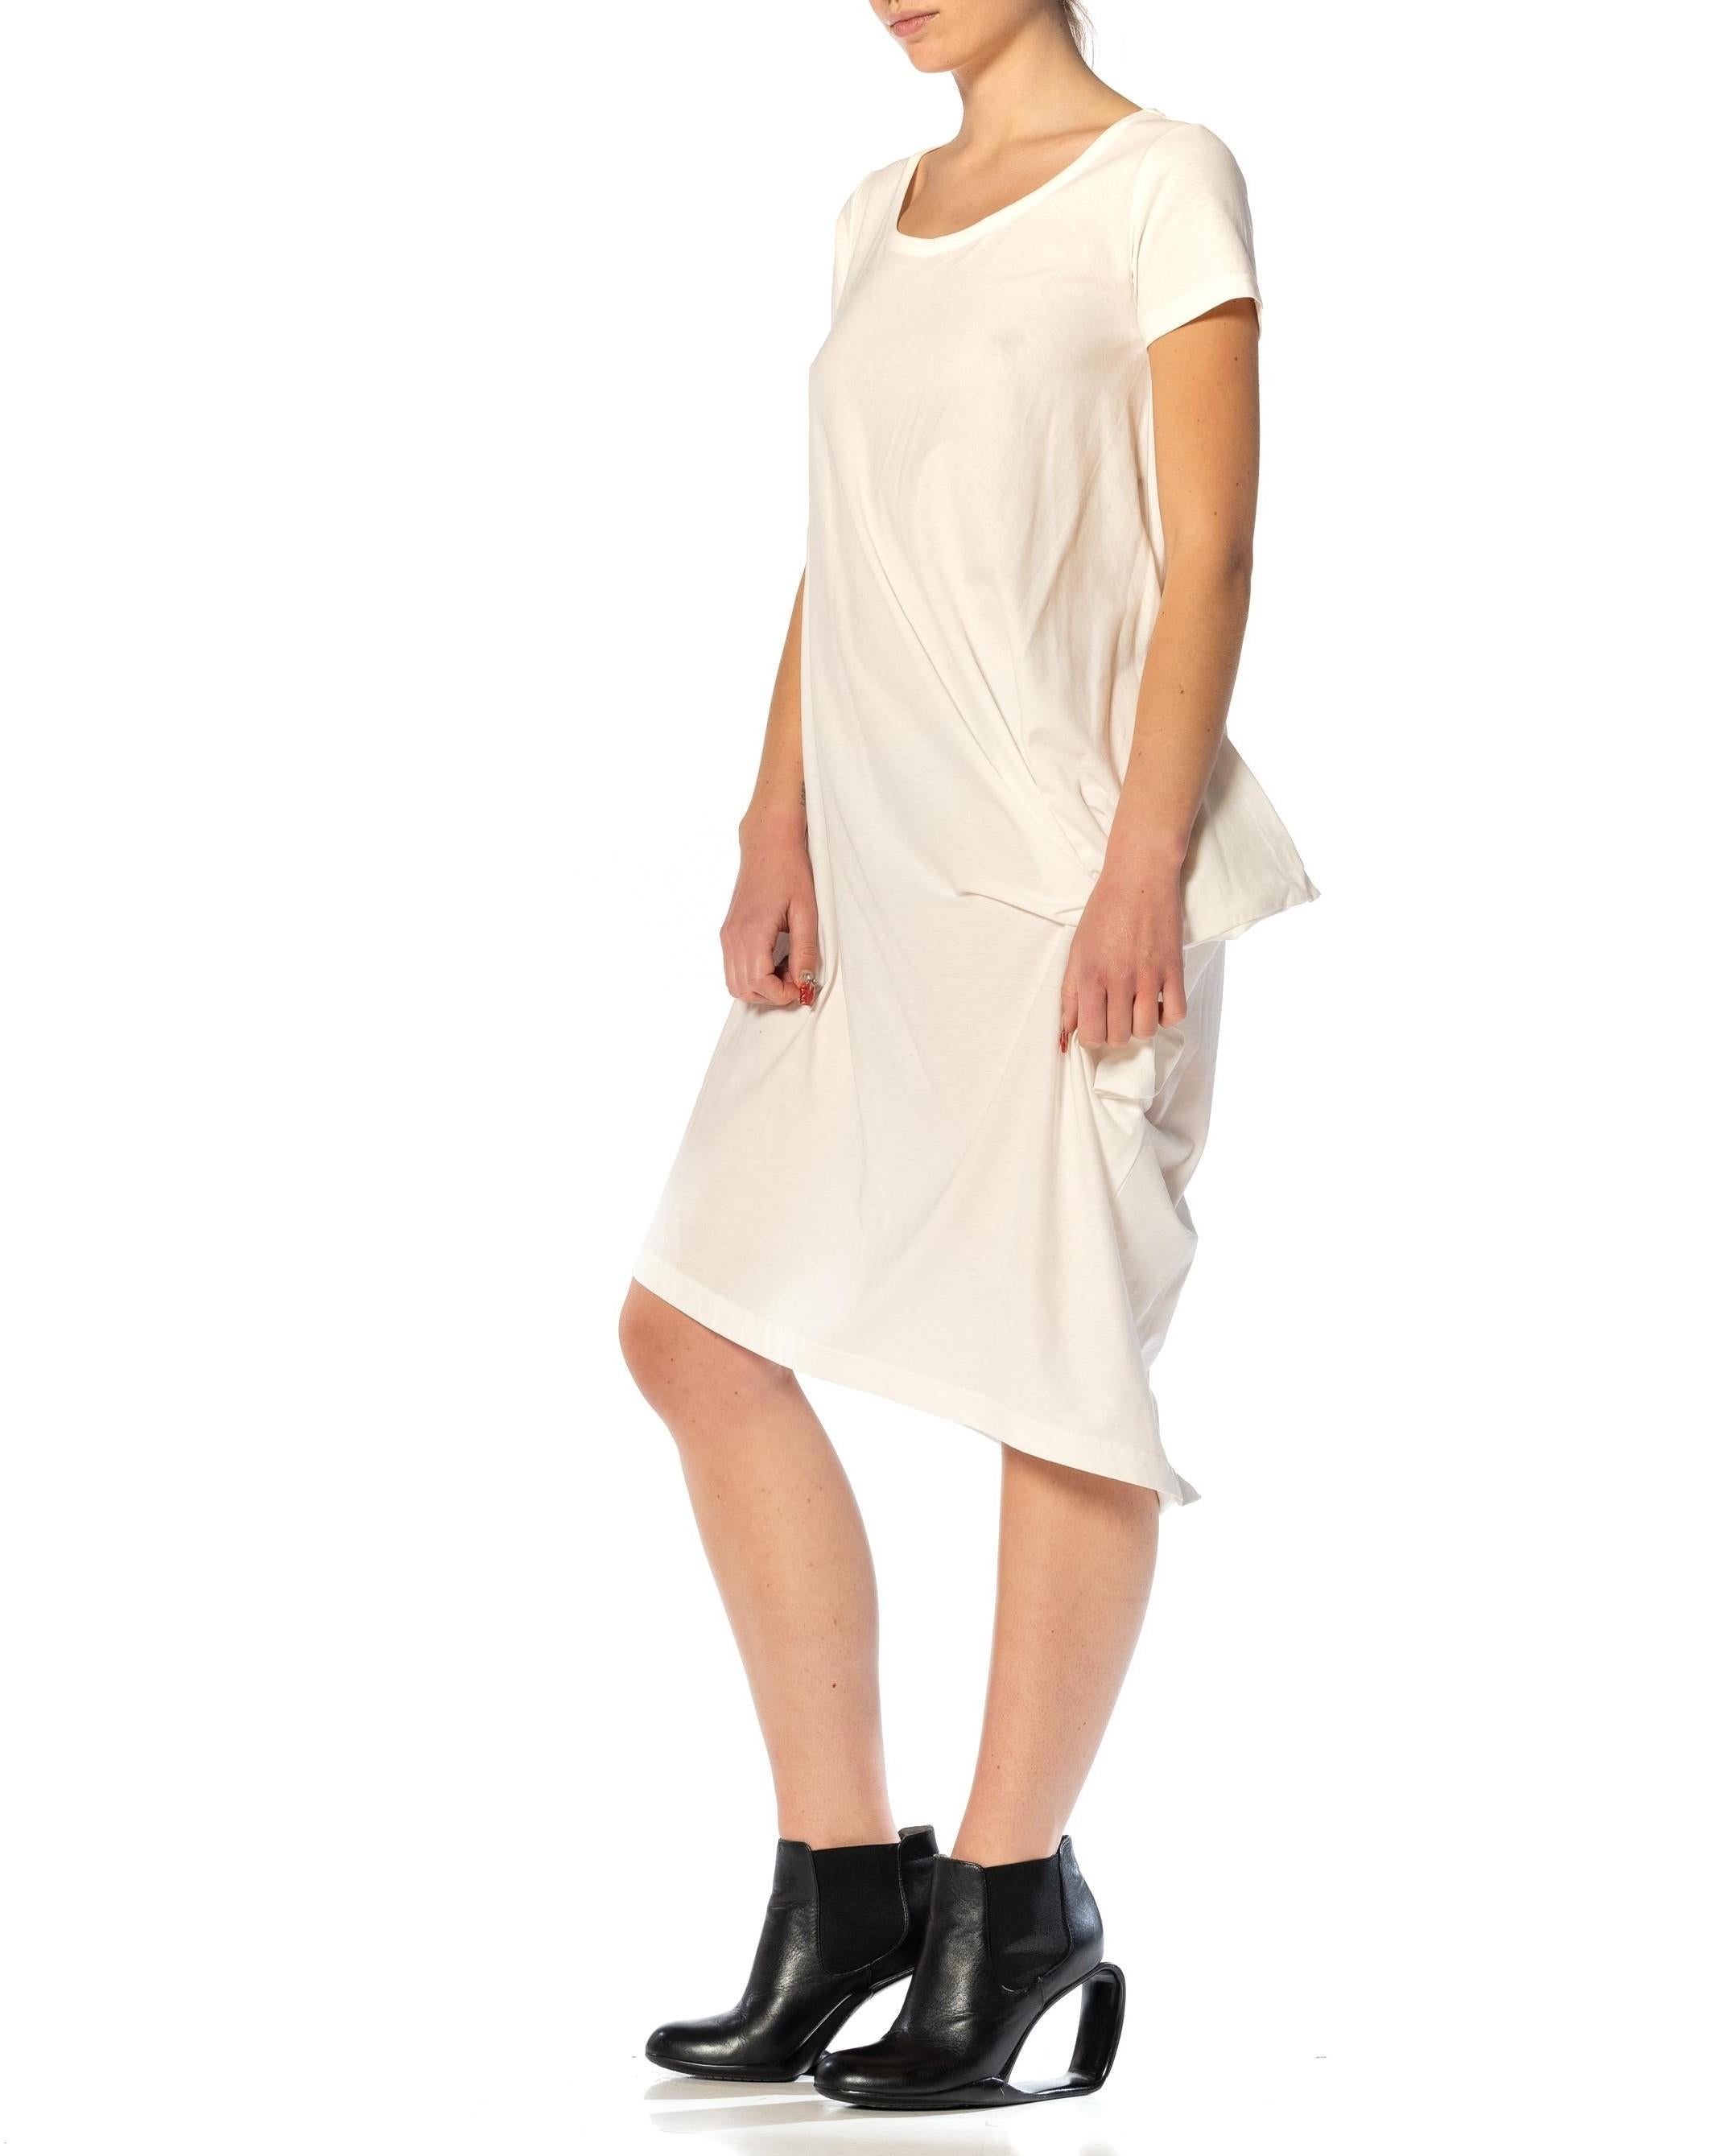 1990S LIMI White Cotton Dress With Pocket For Sale 1